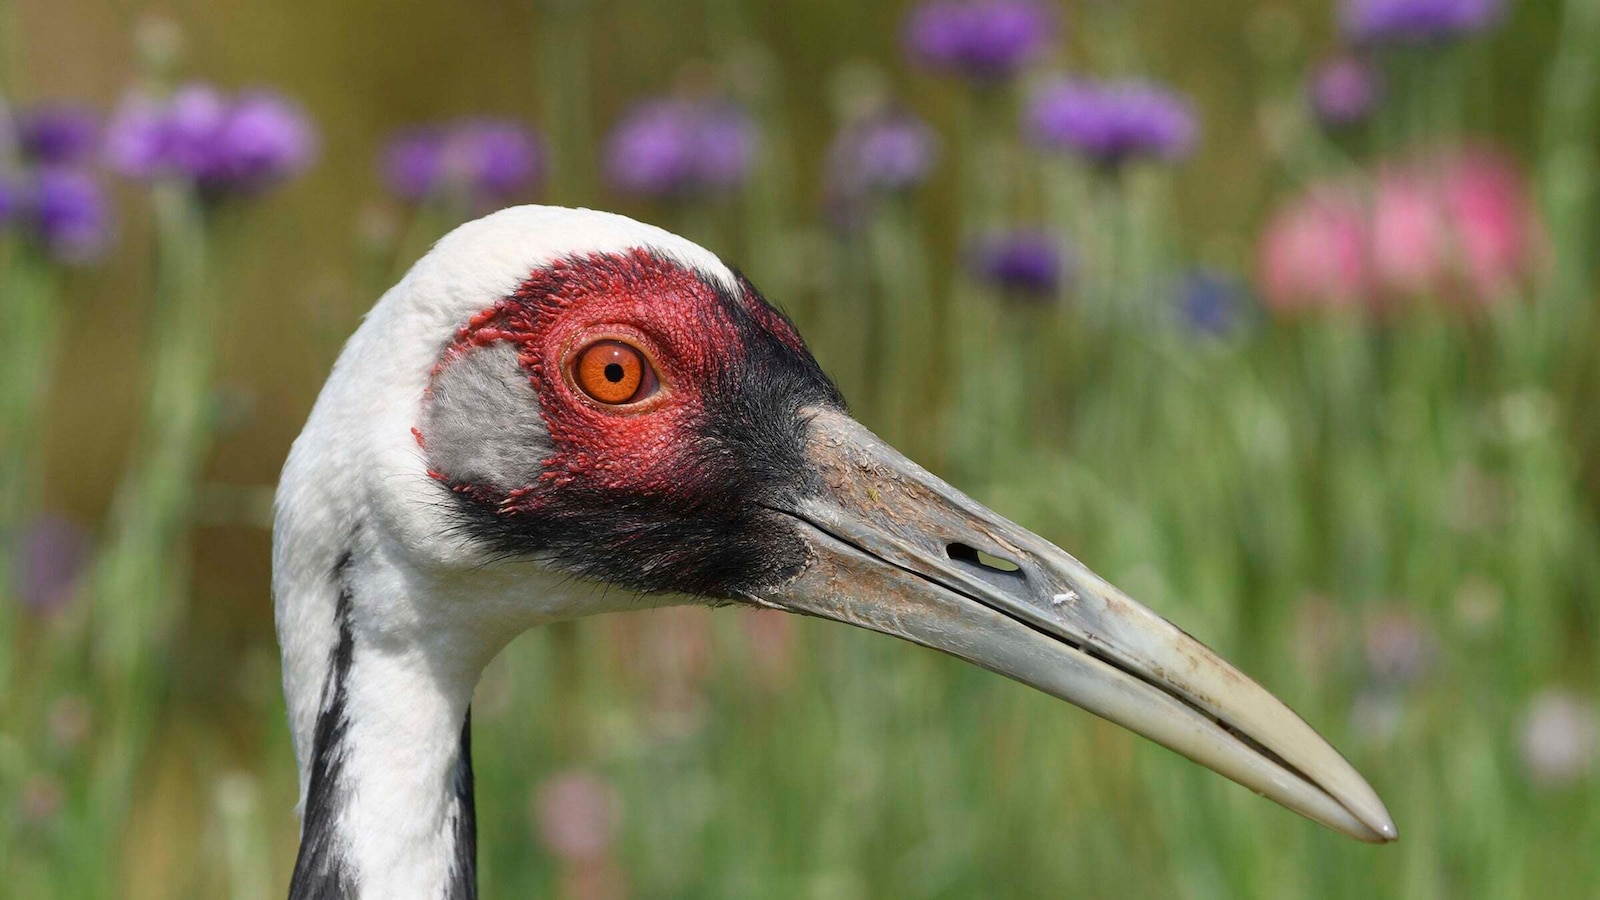 White-naped crane, known for its special bond with a zookeeper, passes away at the age of 42